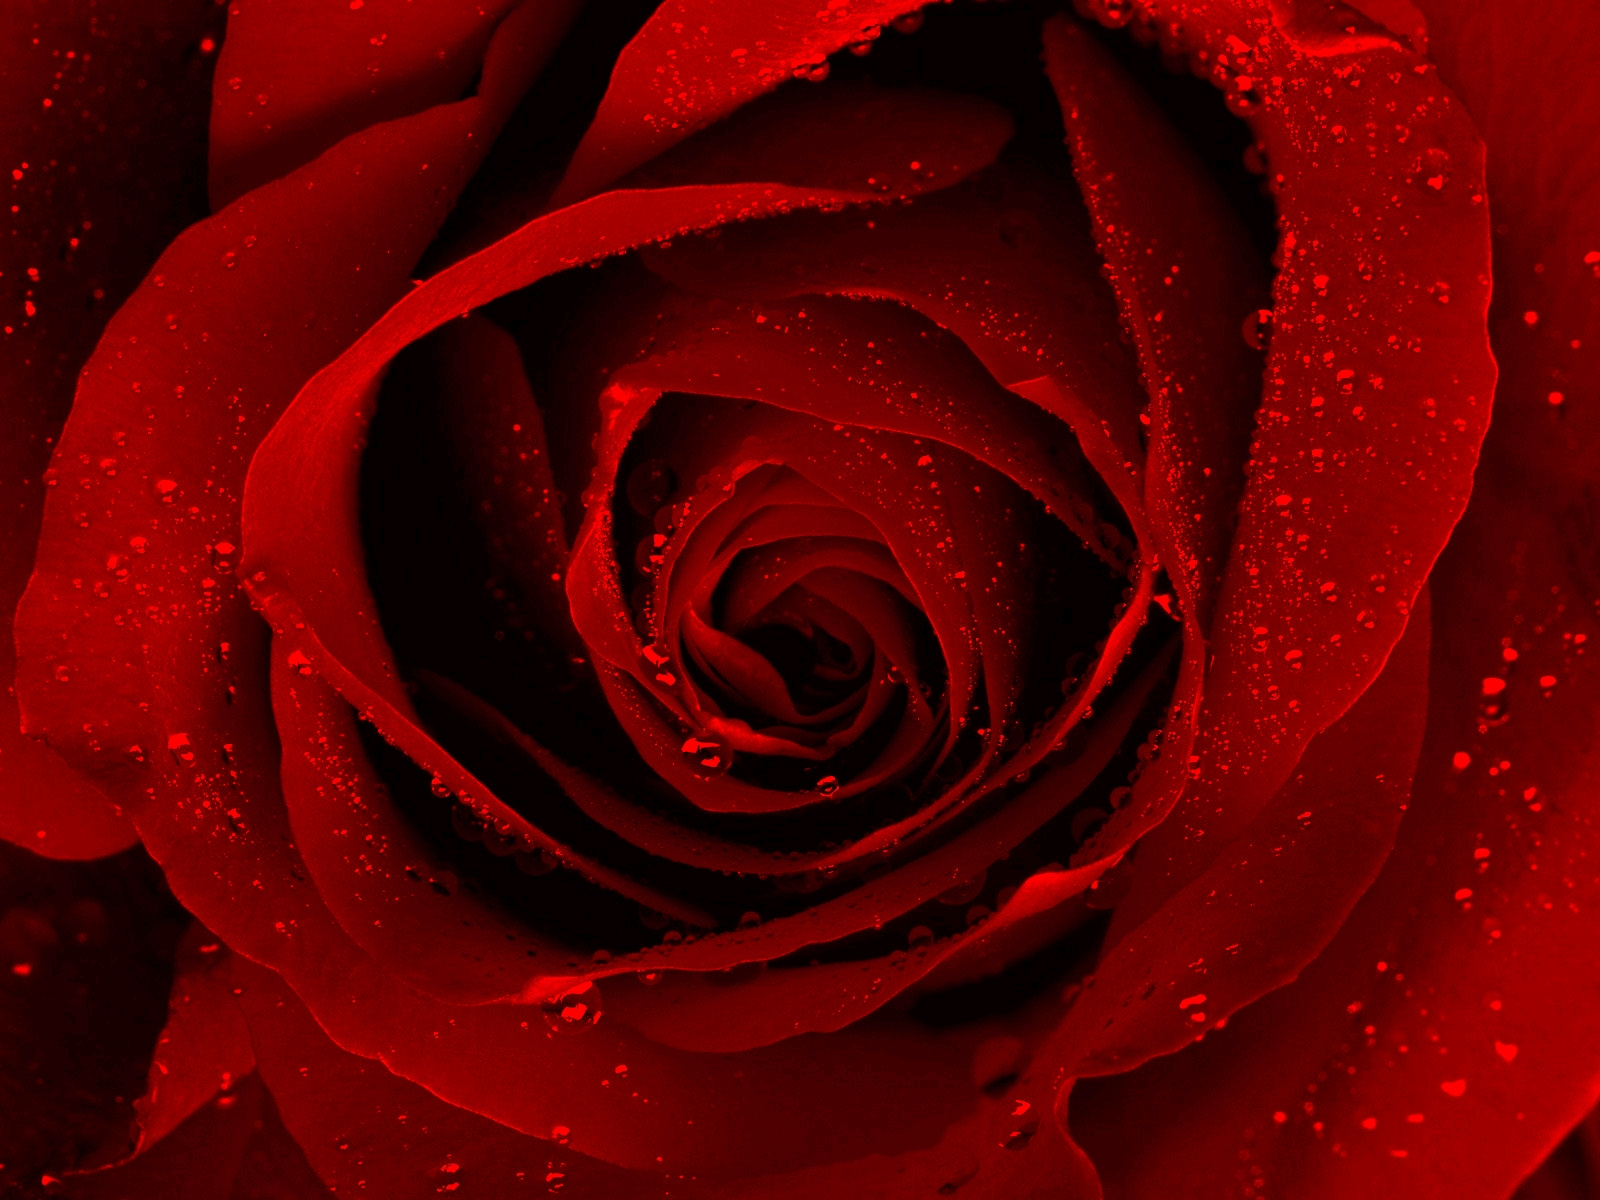 Red Rose with Water Droplets